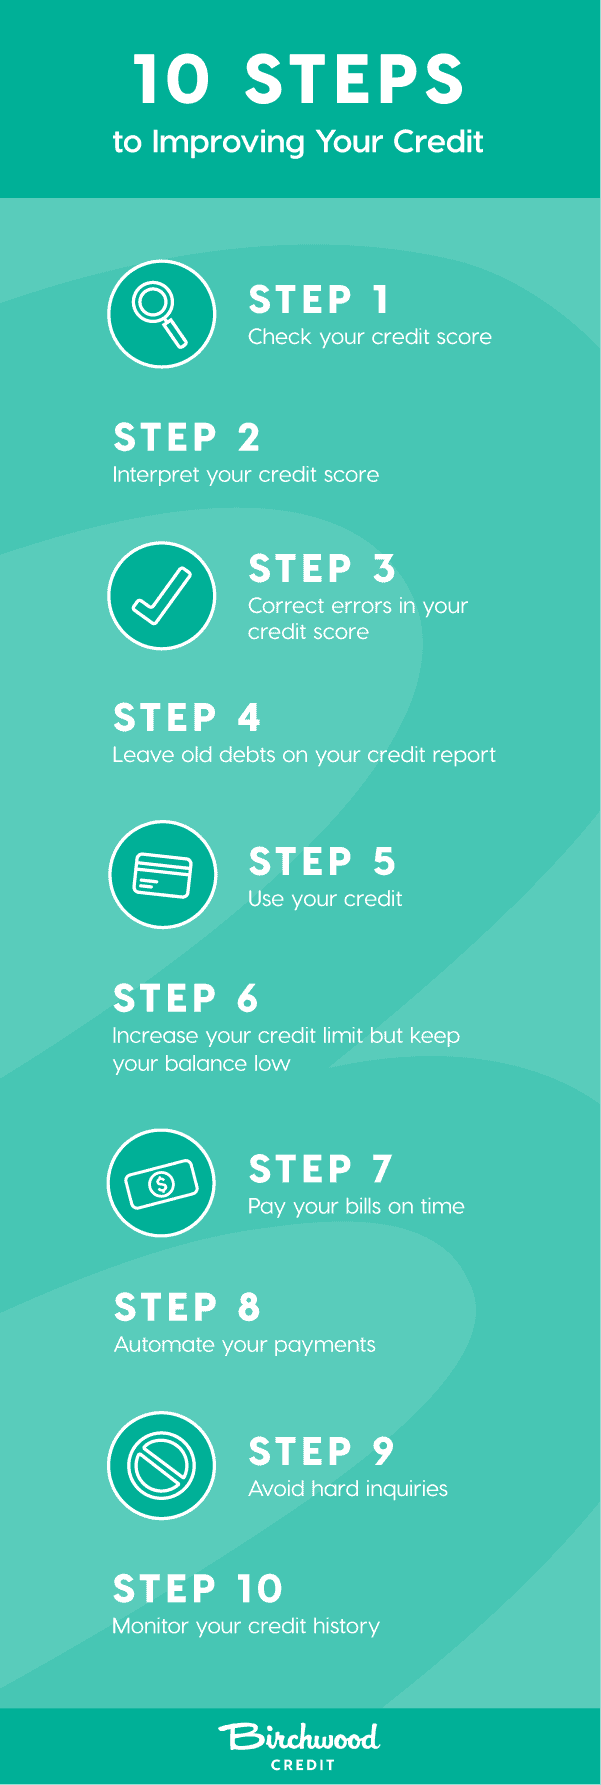 10 steps to better credit.